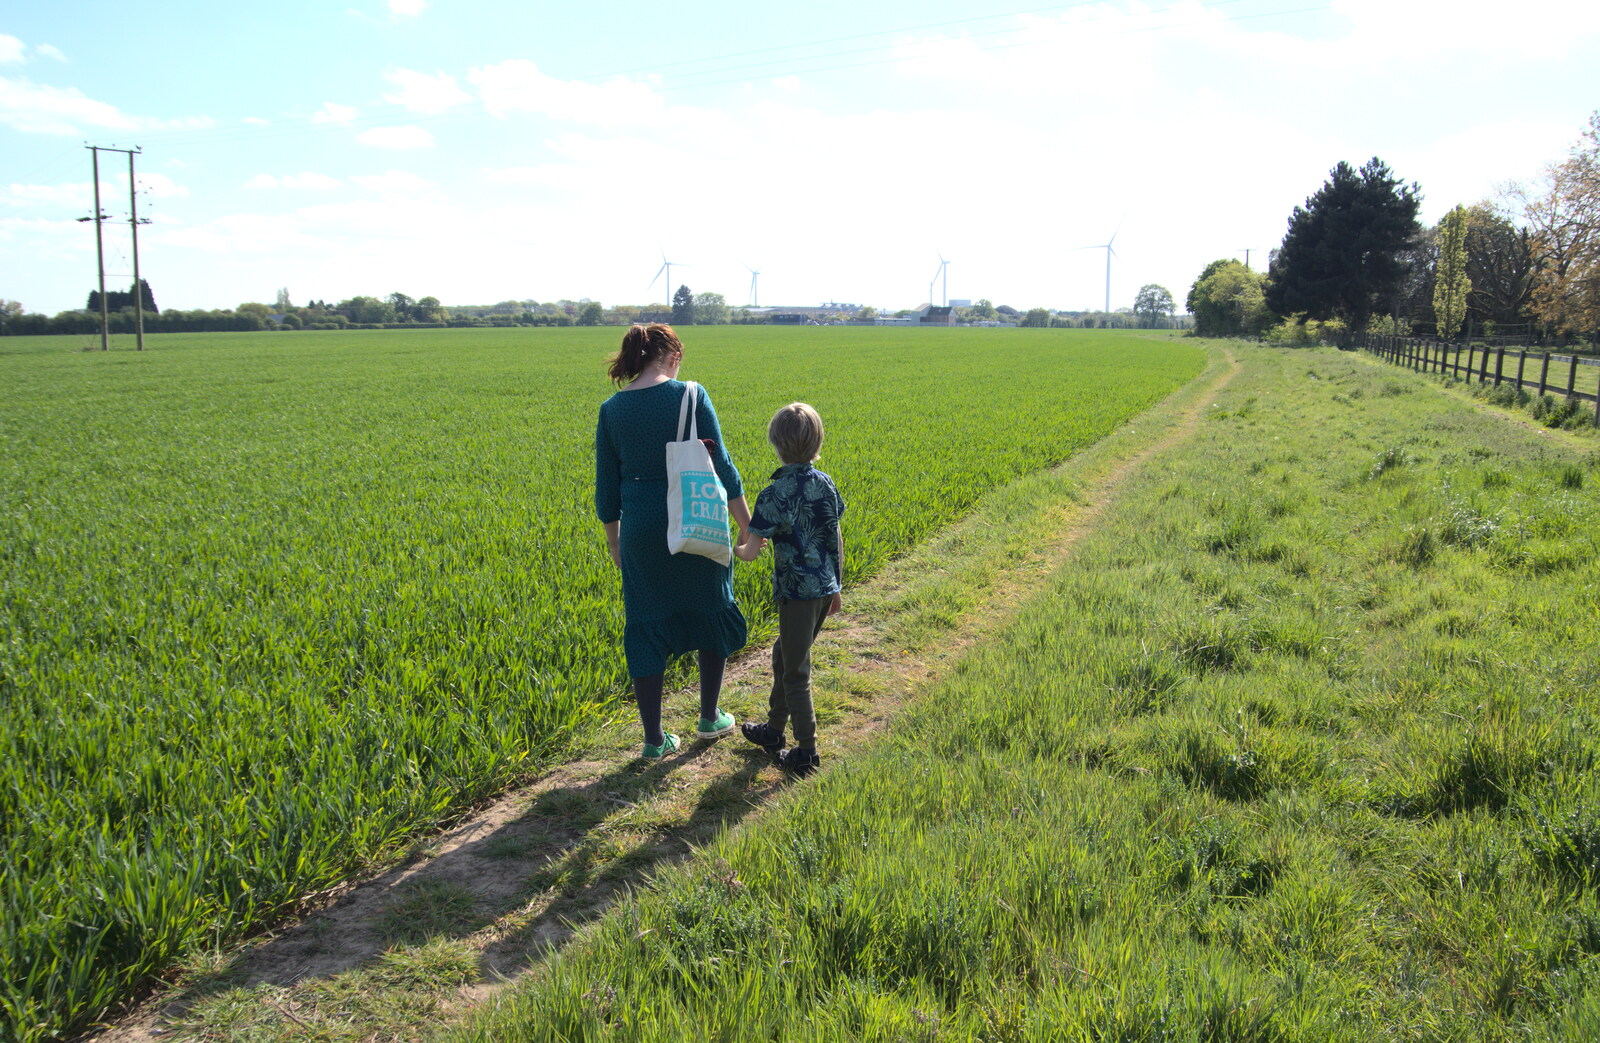 Isobel and Harry on the 100 acre field from Lost Cat and a Walk on Nick's Lane, Brome, Suffolk - 26th April 2020